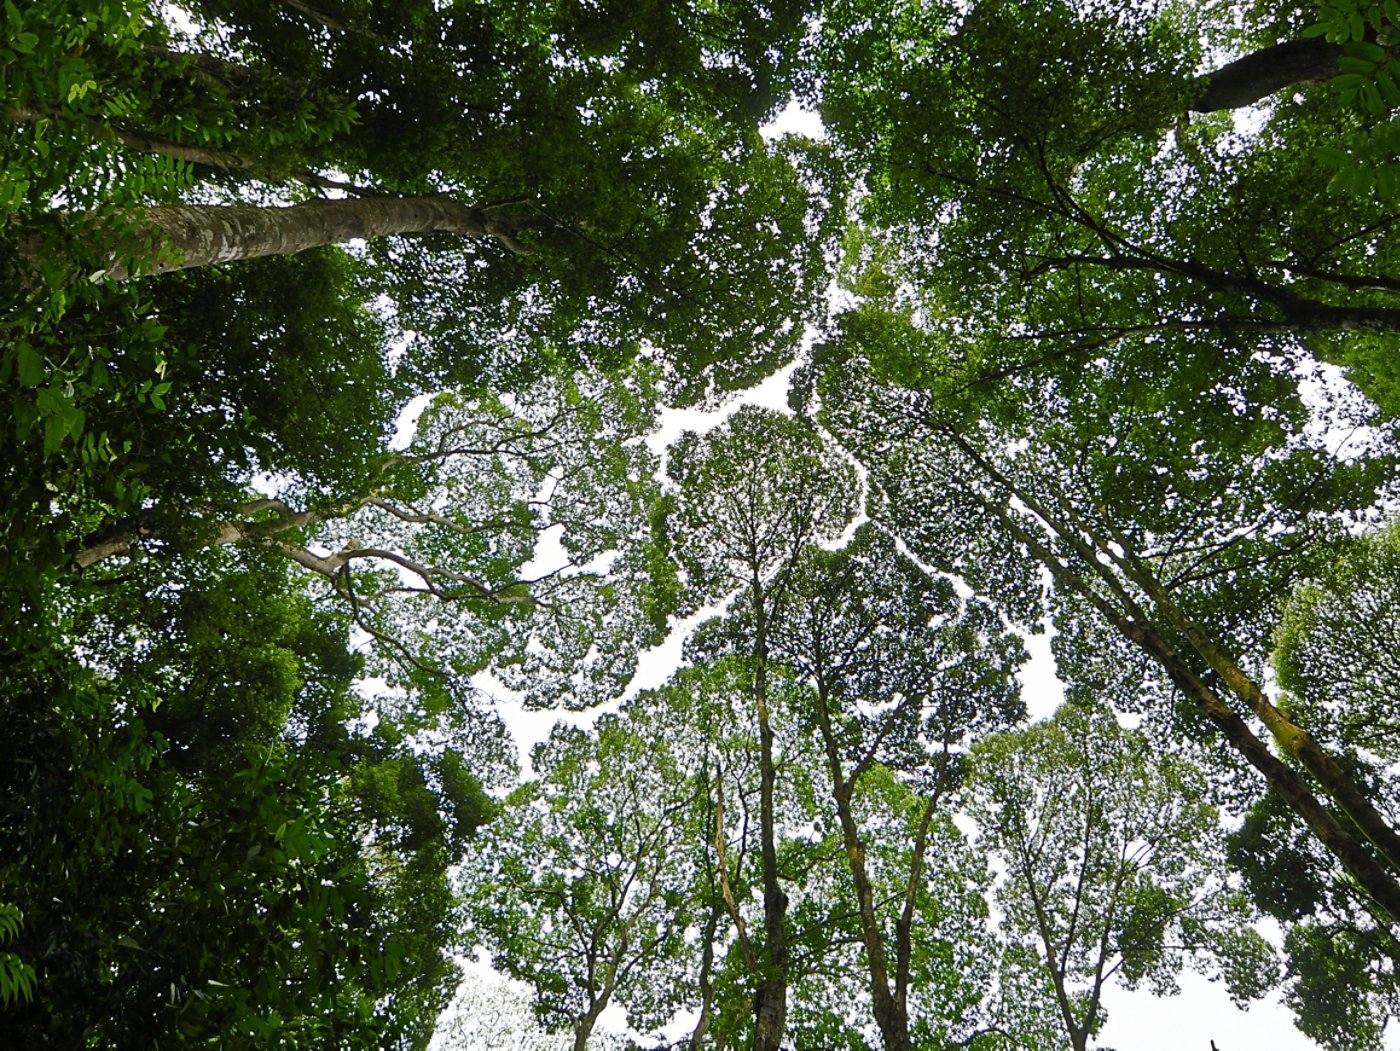 A phenomenon present in some tree species, in which the crowns do not touch each other. Thus, the canopy appears to have channel-like gaps.